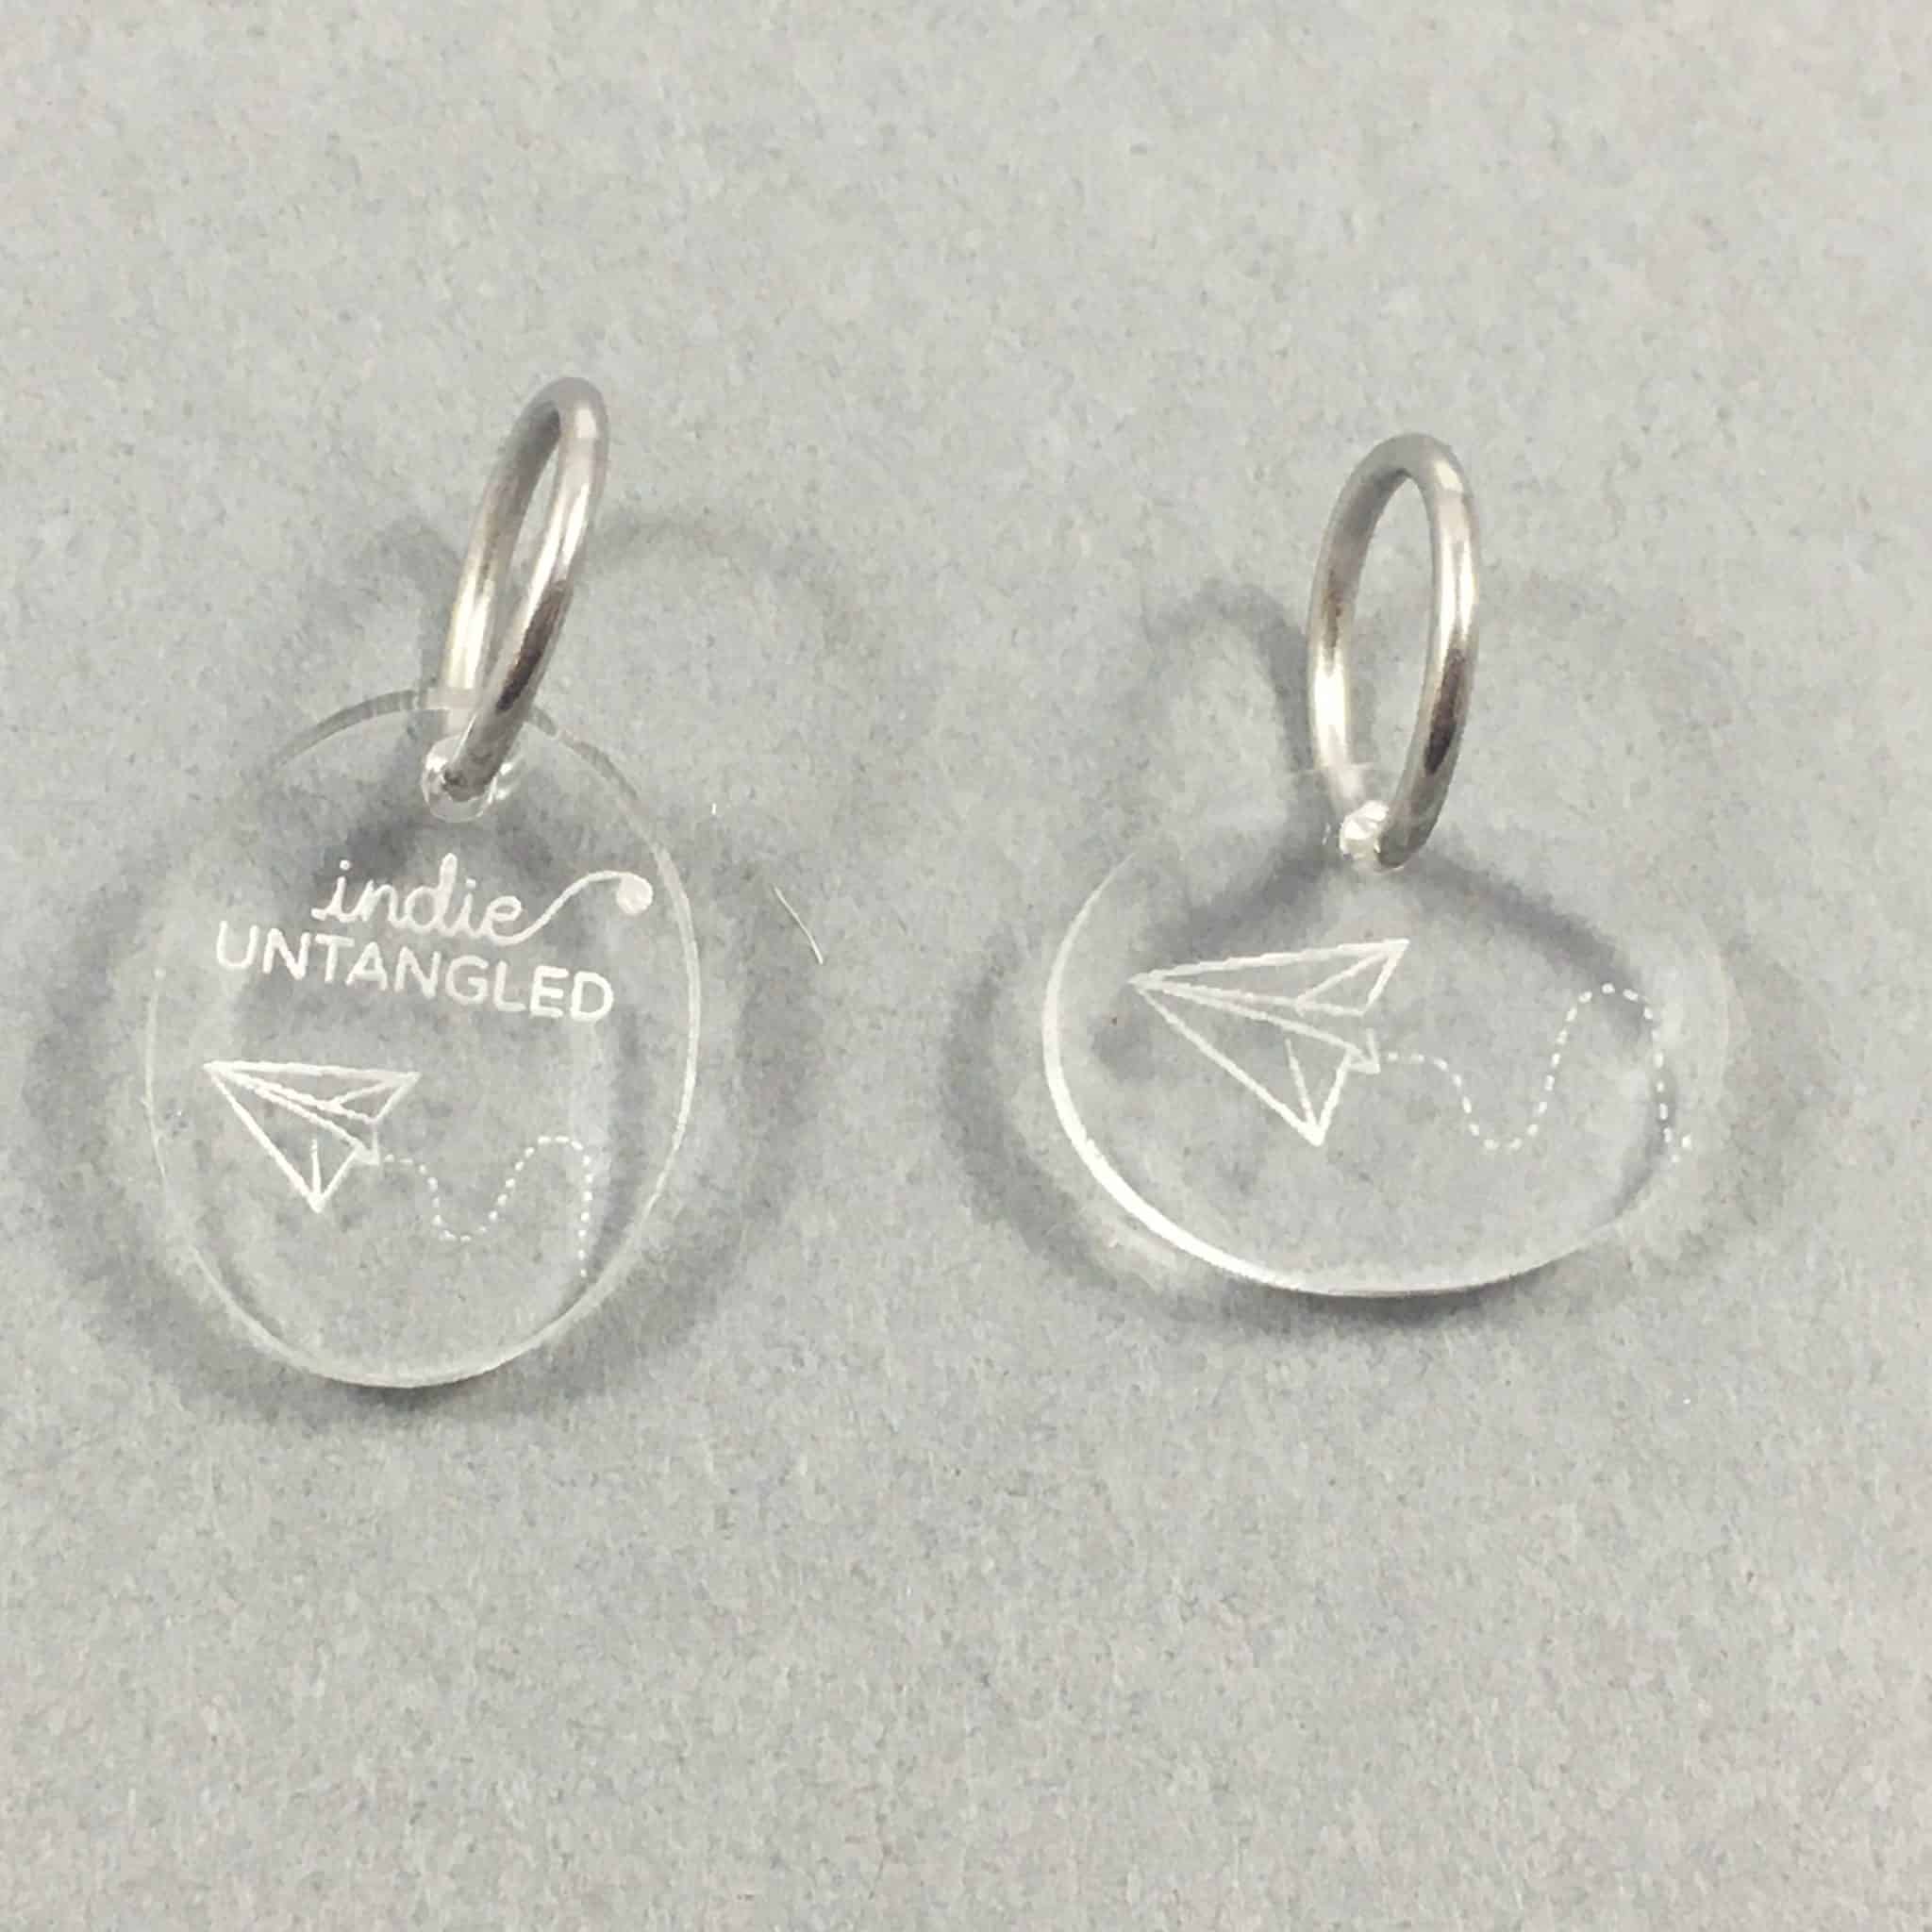 Clear stitch markers with paper airplanes.